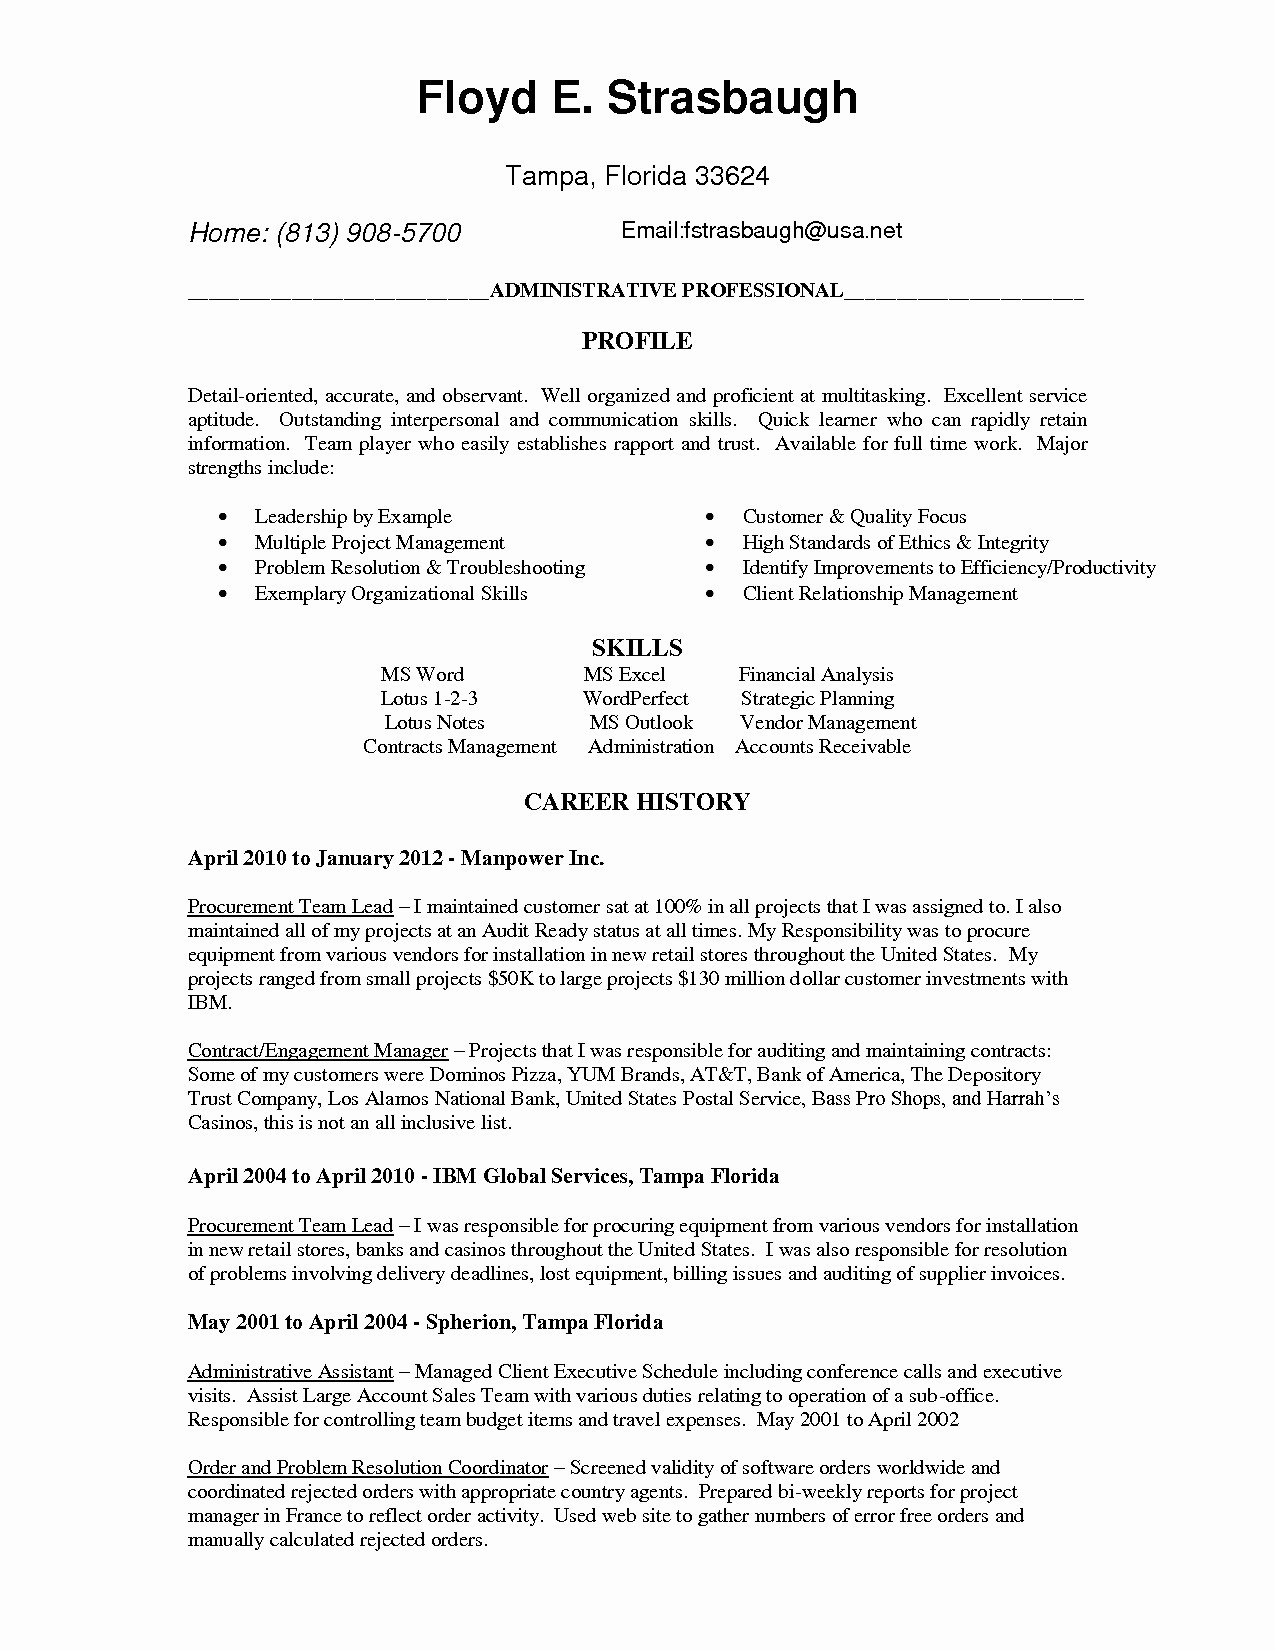 Professional Cover Letter Template Free - â Free Microsoft Word Resume Templates Awesome Professional Job